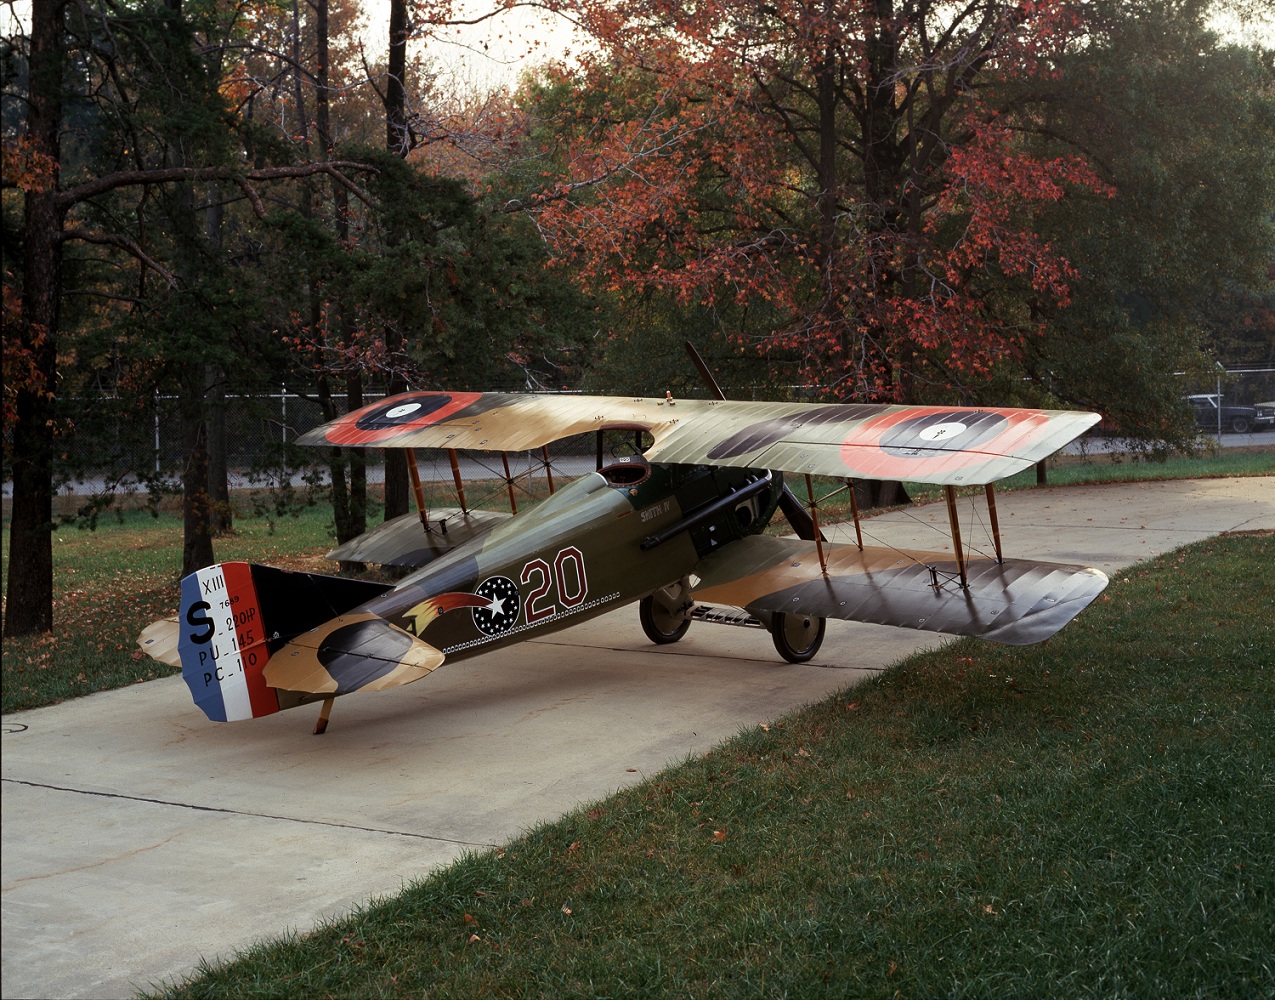 SPAD S.XIII C.1 serial number 7689, Smith IV, after restoration at the Paul E. Garber Center, Smithsonian Institution National Air and Space Museum. (NASM)